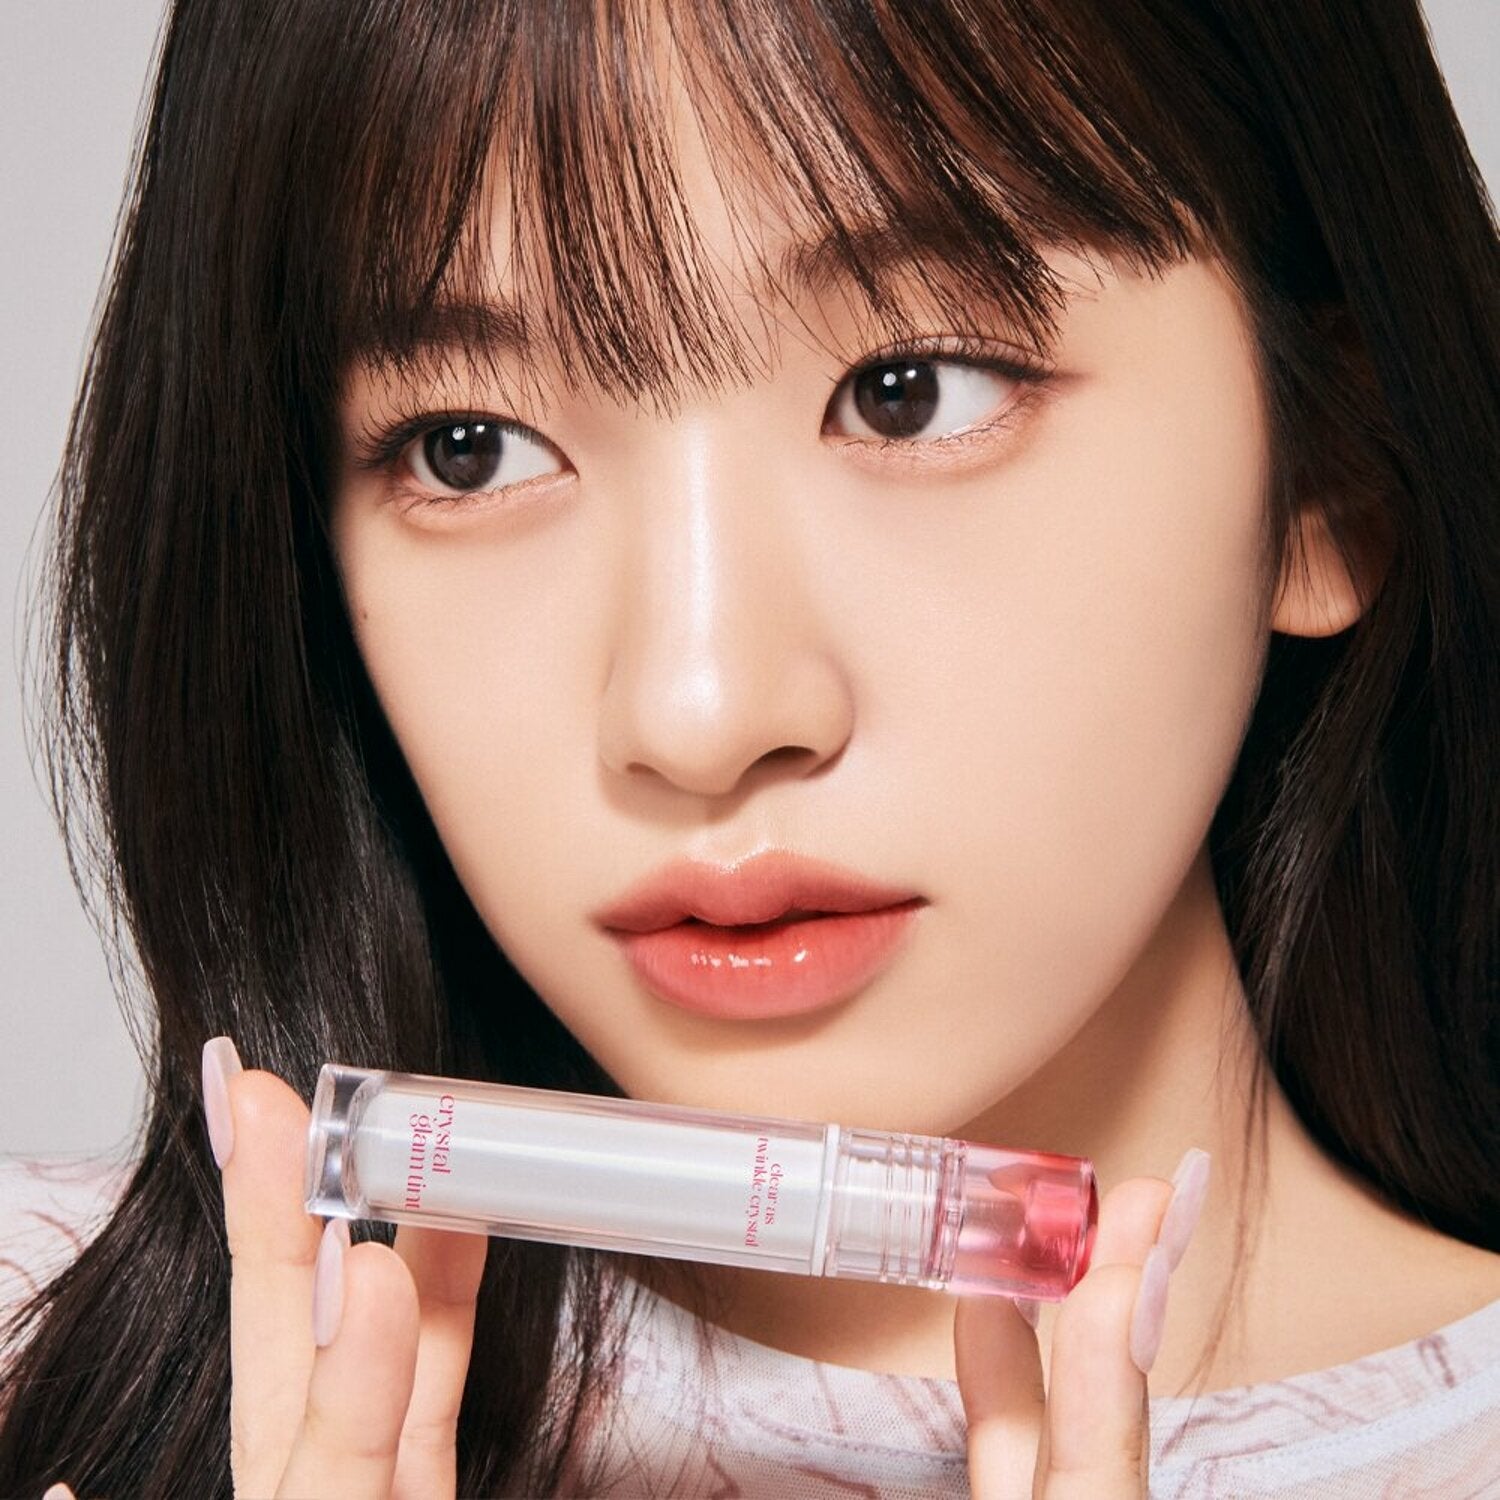 CLIO Crystal Glam Tint - Kpop Wholesale | Seoufly